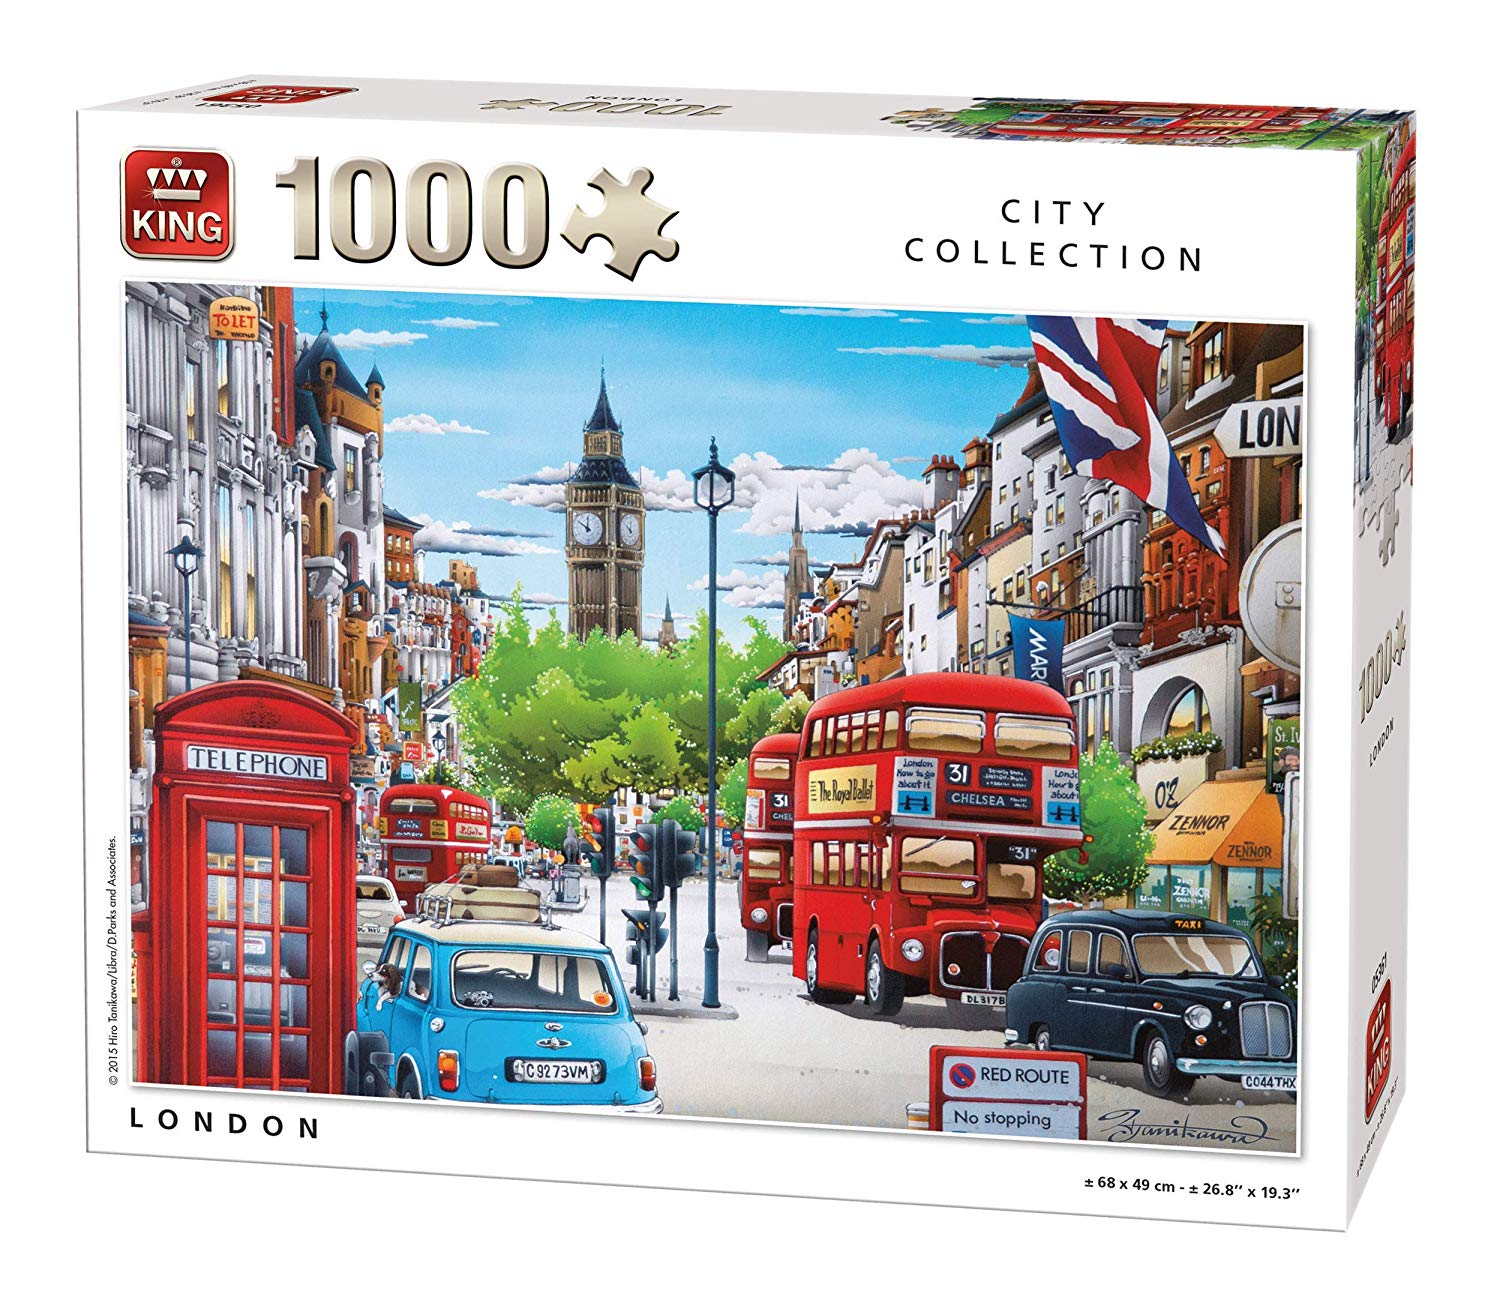 London Jigsaw Puzzle (1000 Pieces) King